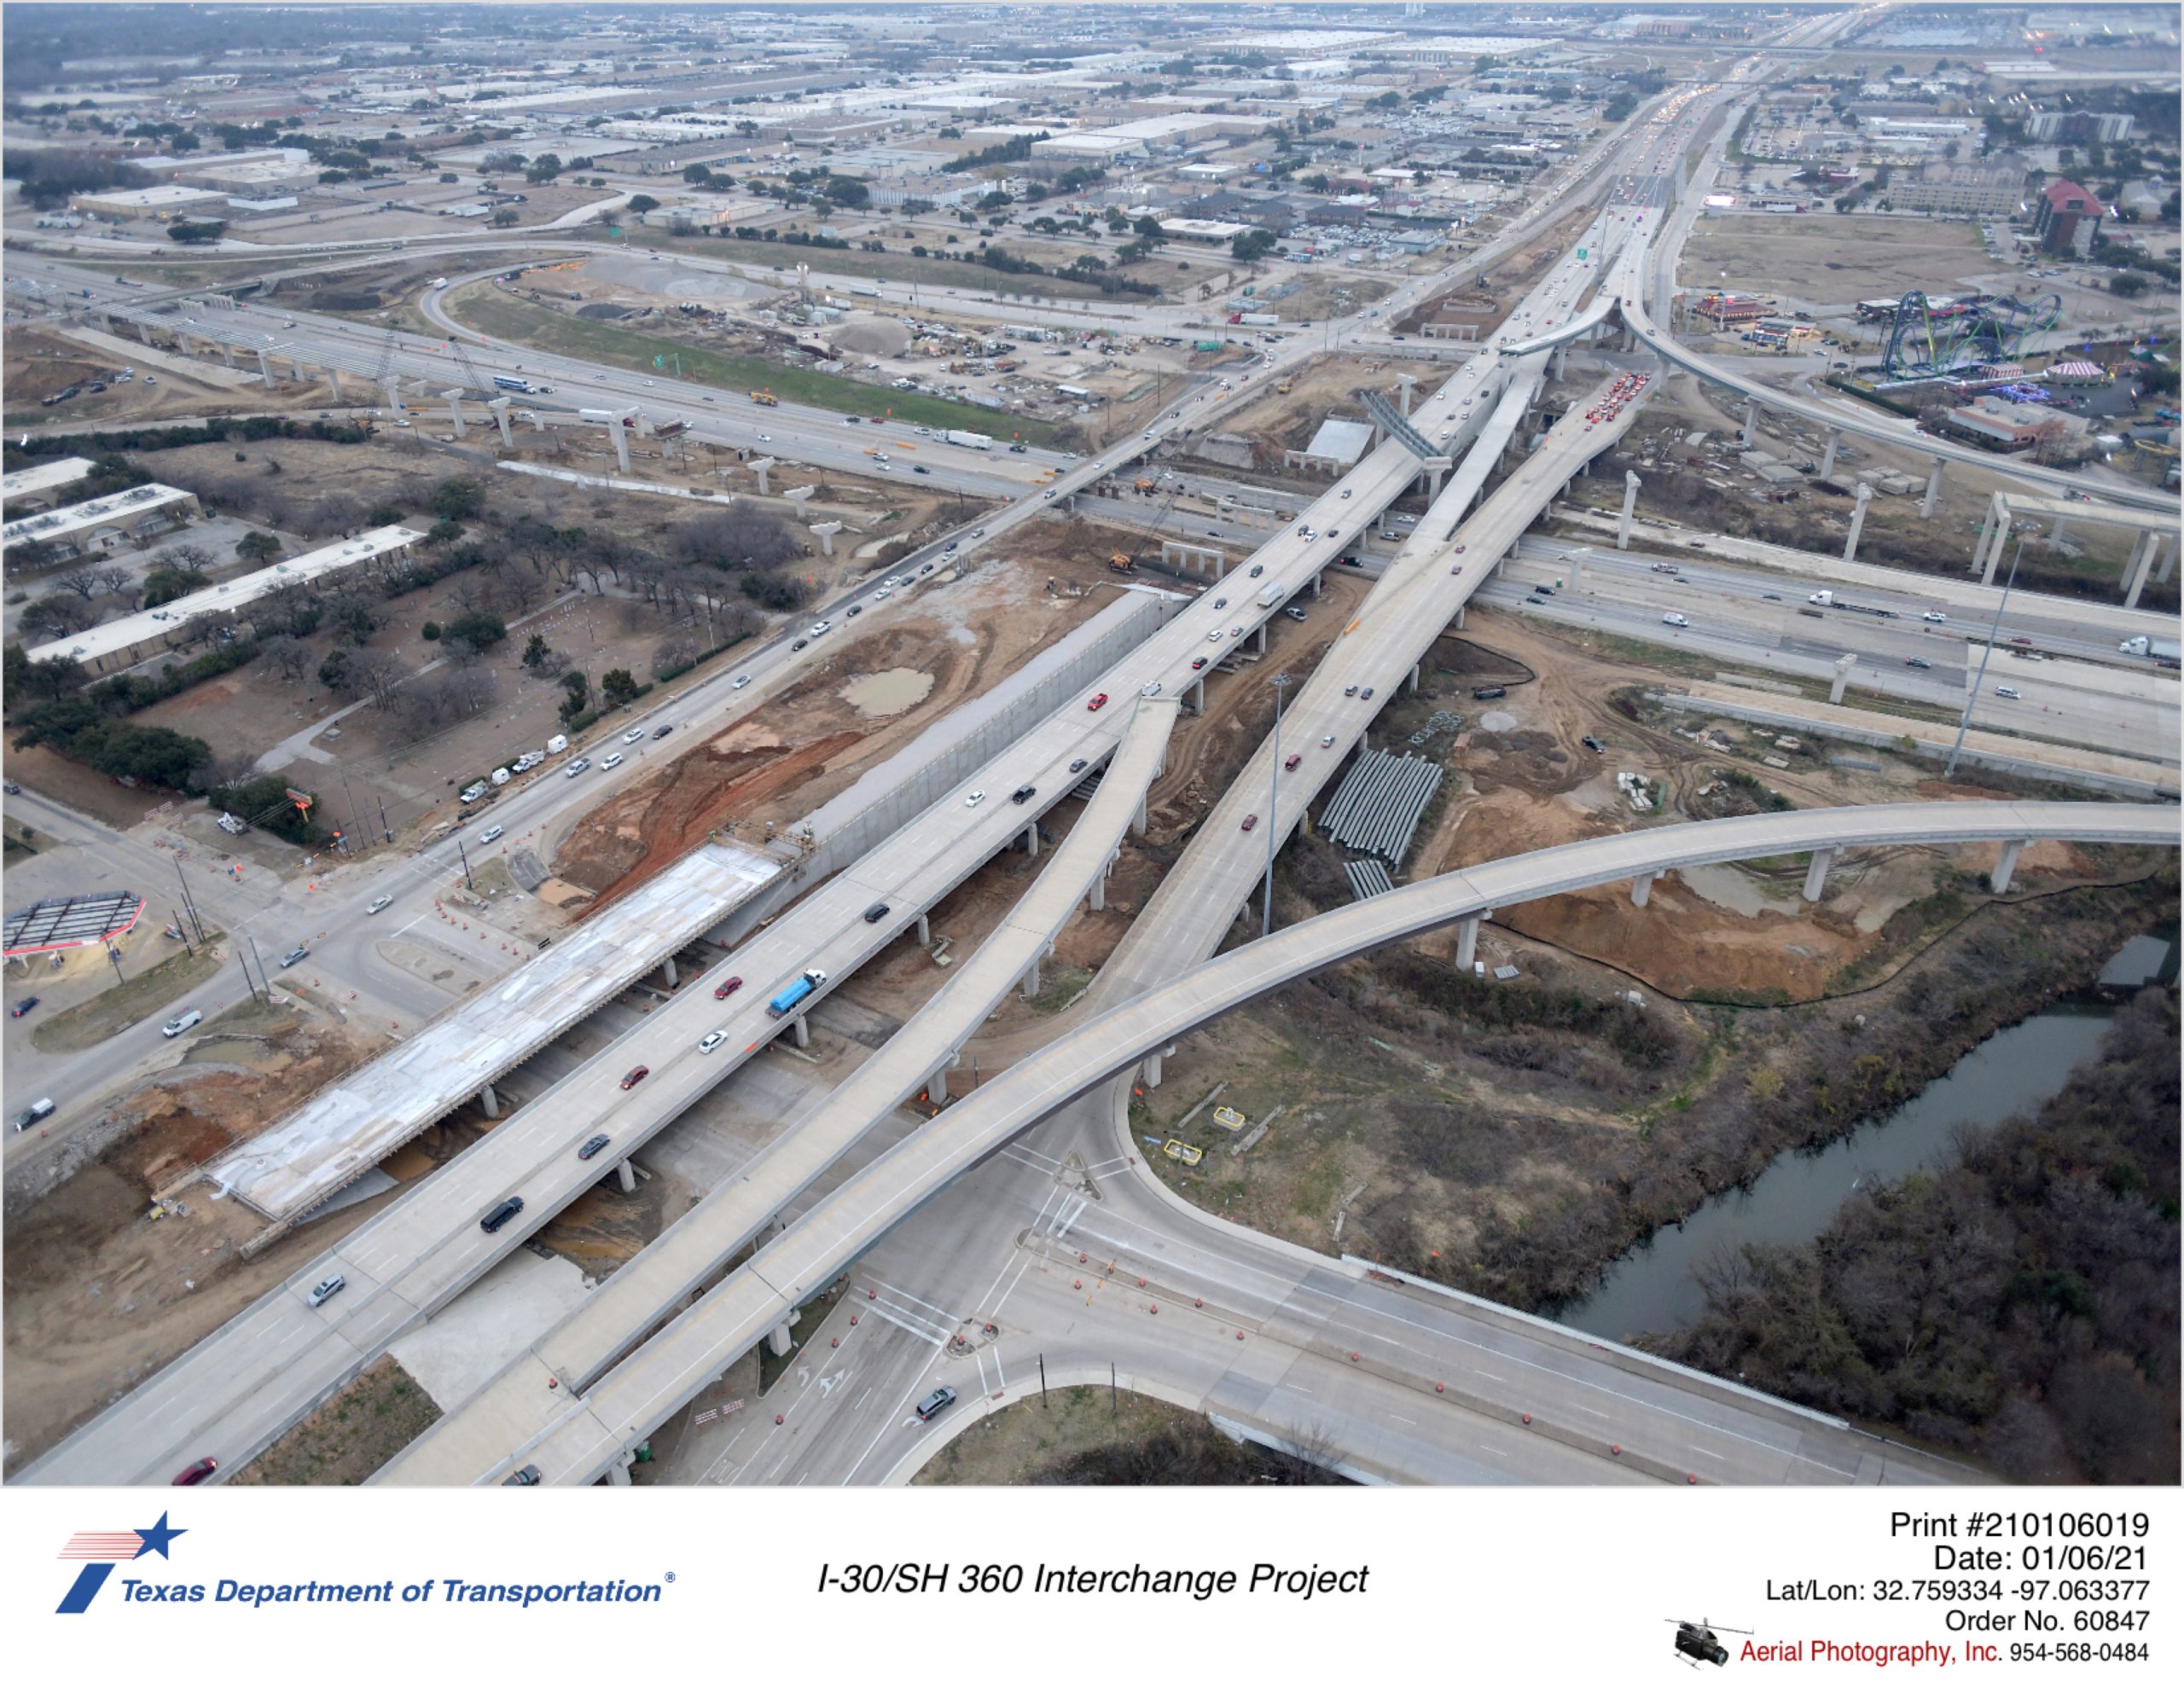 I-30/SH 360 interchange looking southeast over Lamar Blvd. Construction of new northbound mainlane bridges over Lamar Blvd and I-30 are shown.